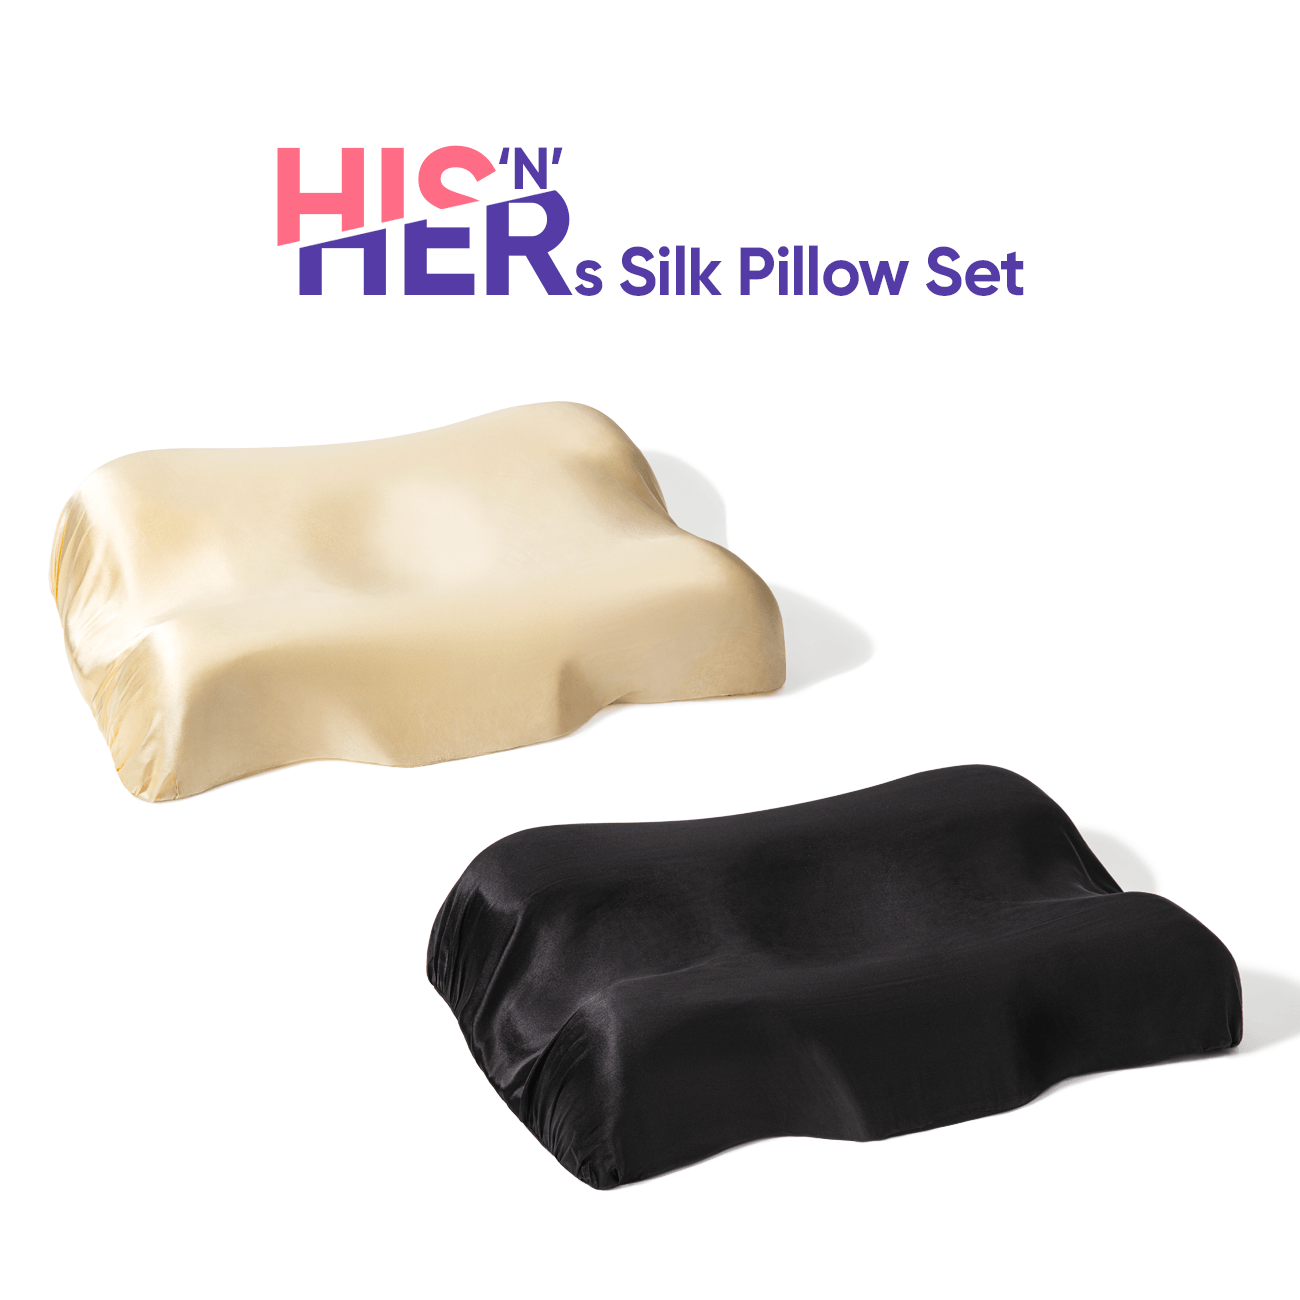 His'n'Hers - 2 Pillows Set with Silk Pillowcases on